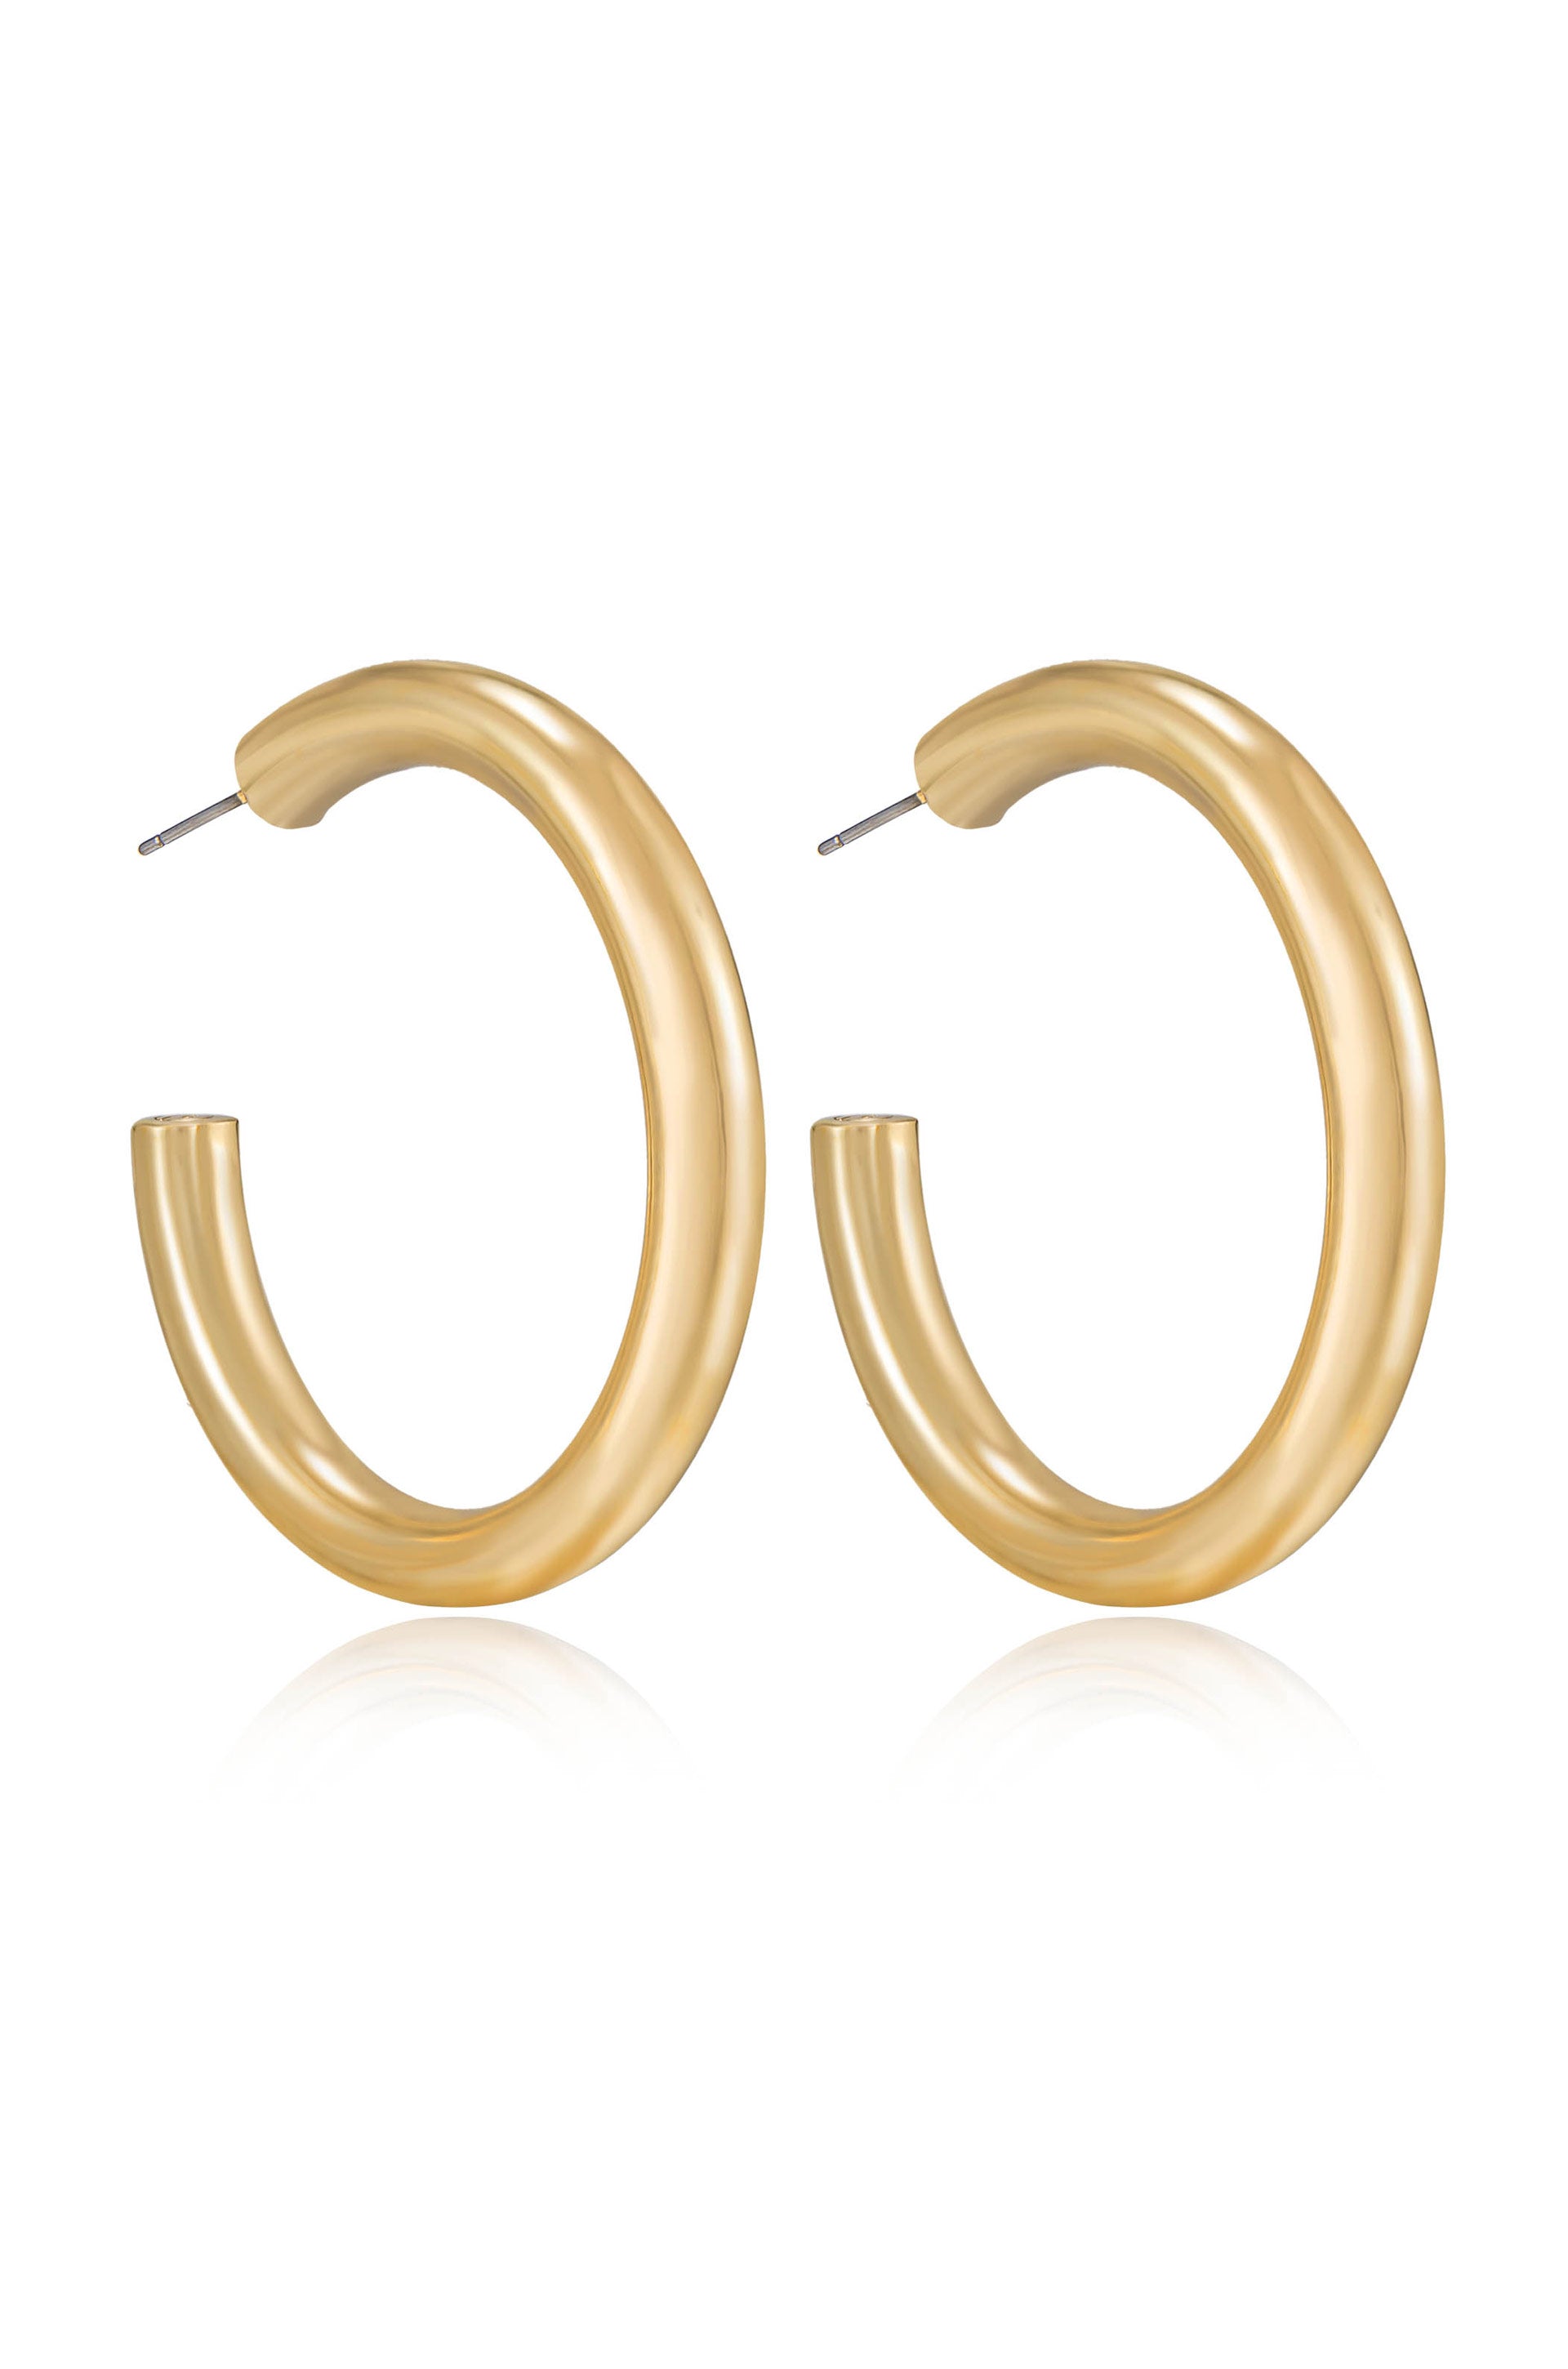 Thick Classic Hoops in large in gold side view